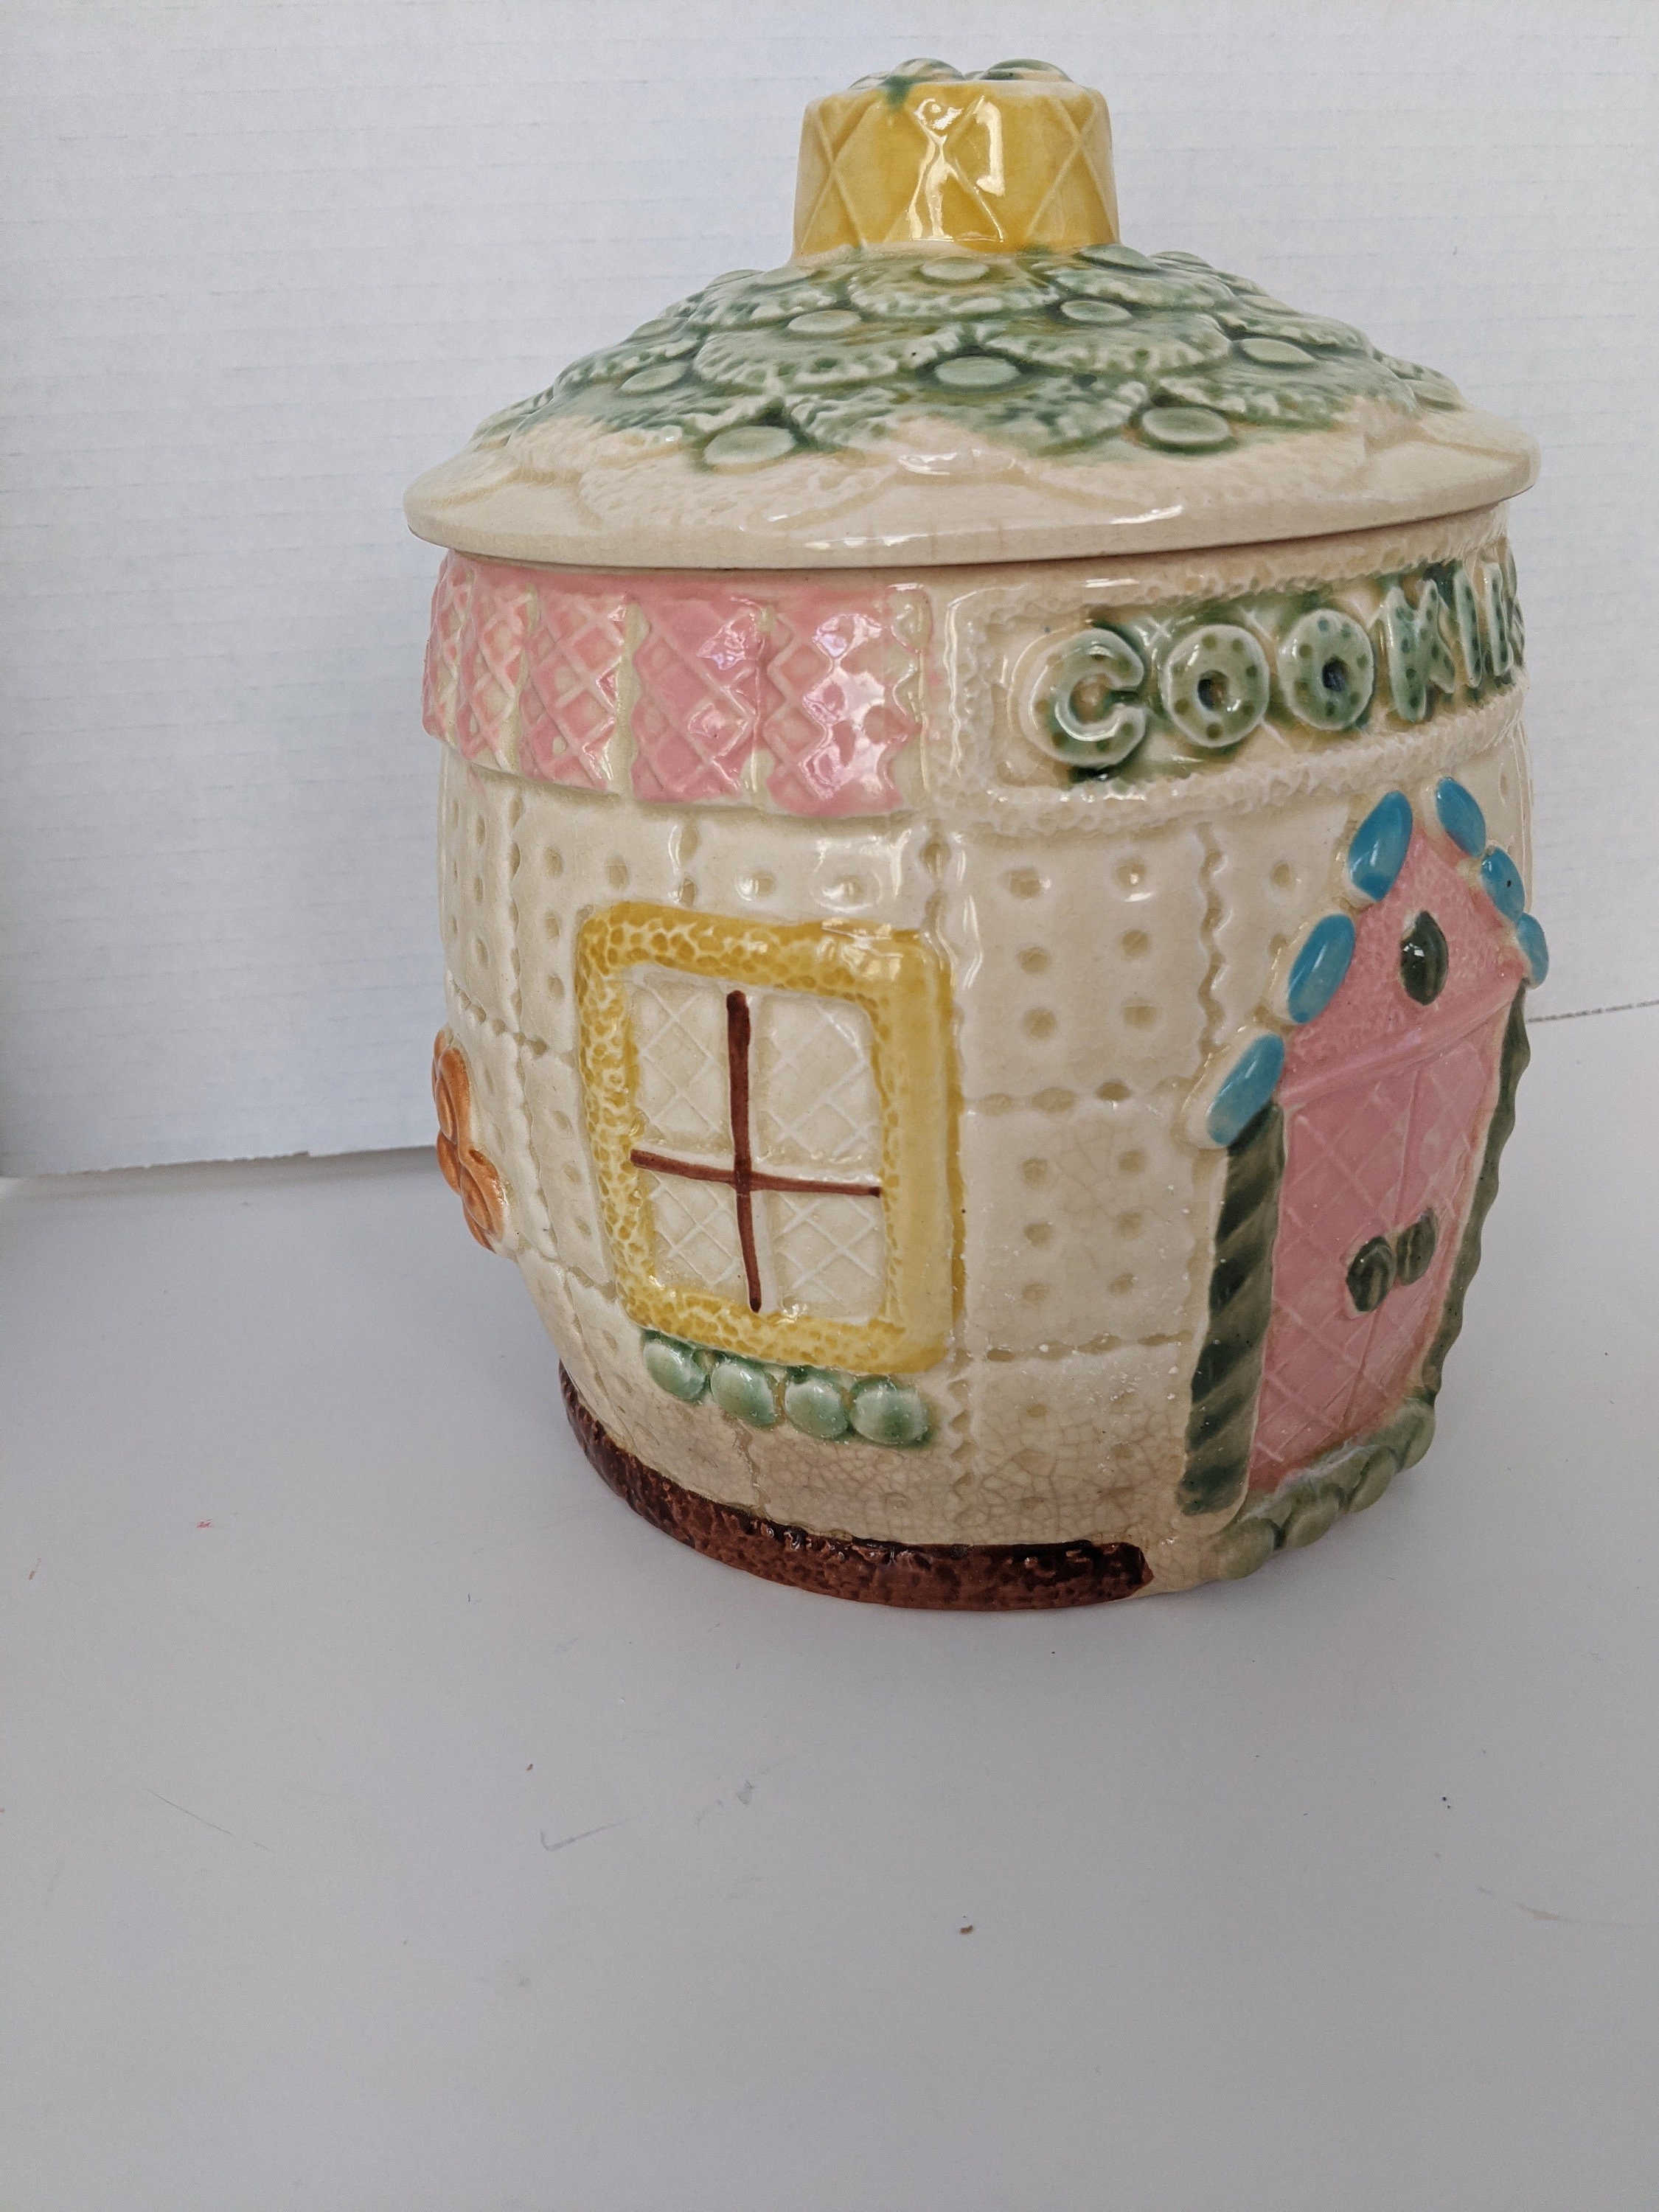 Vintage Round House Cookie Jar Colourful House Cookie Jar from | Etsy